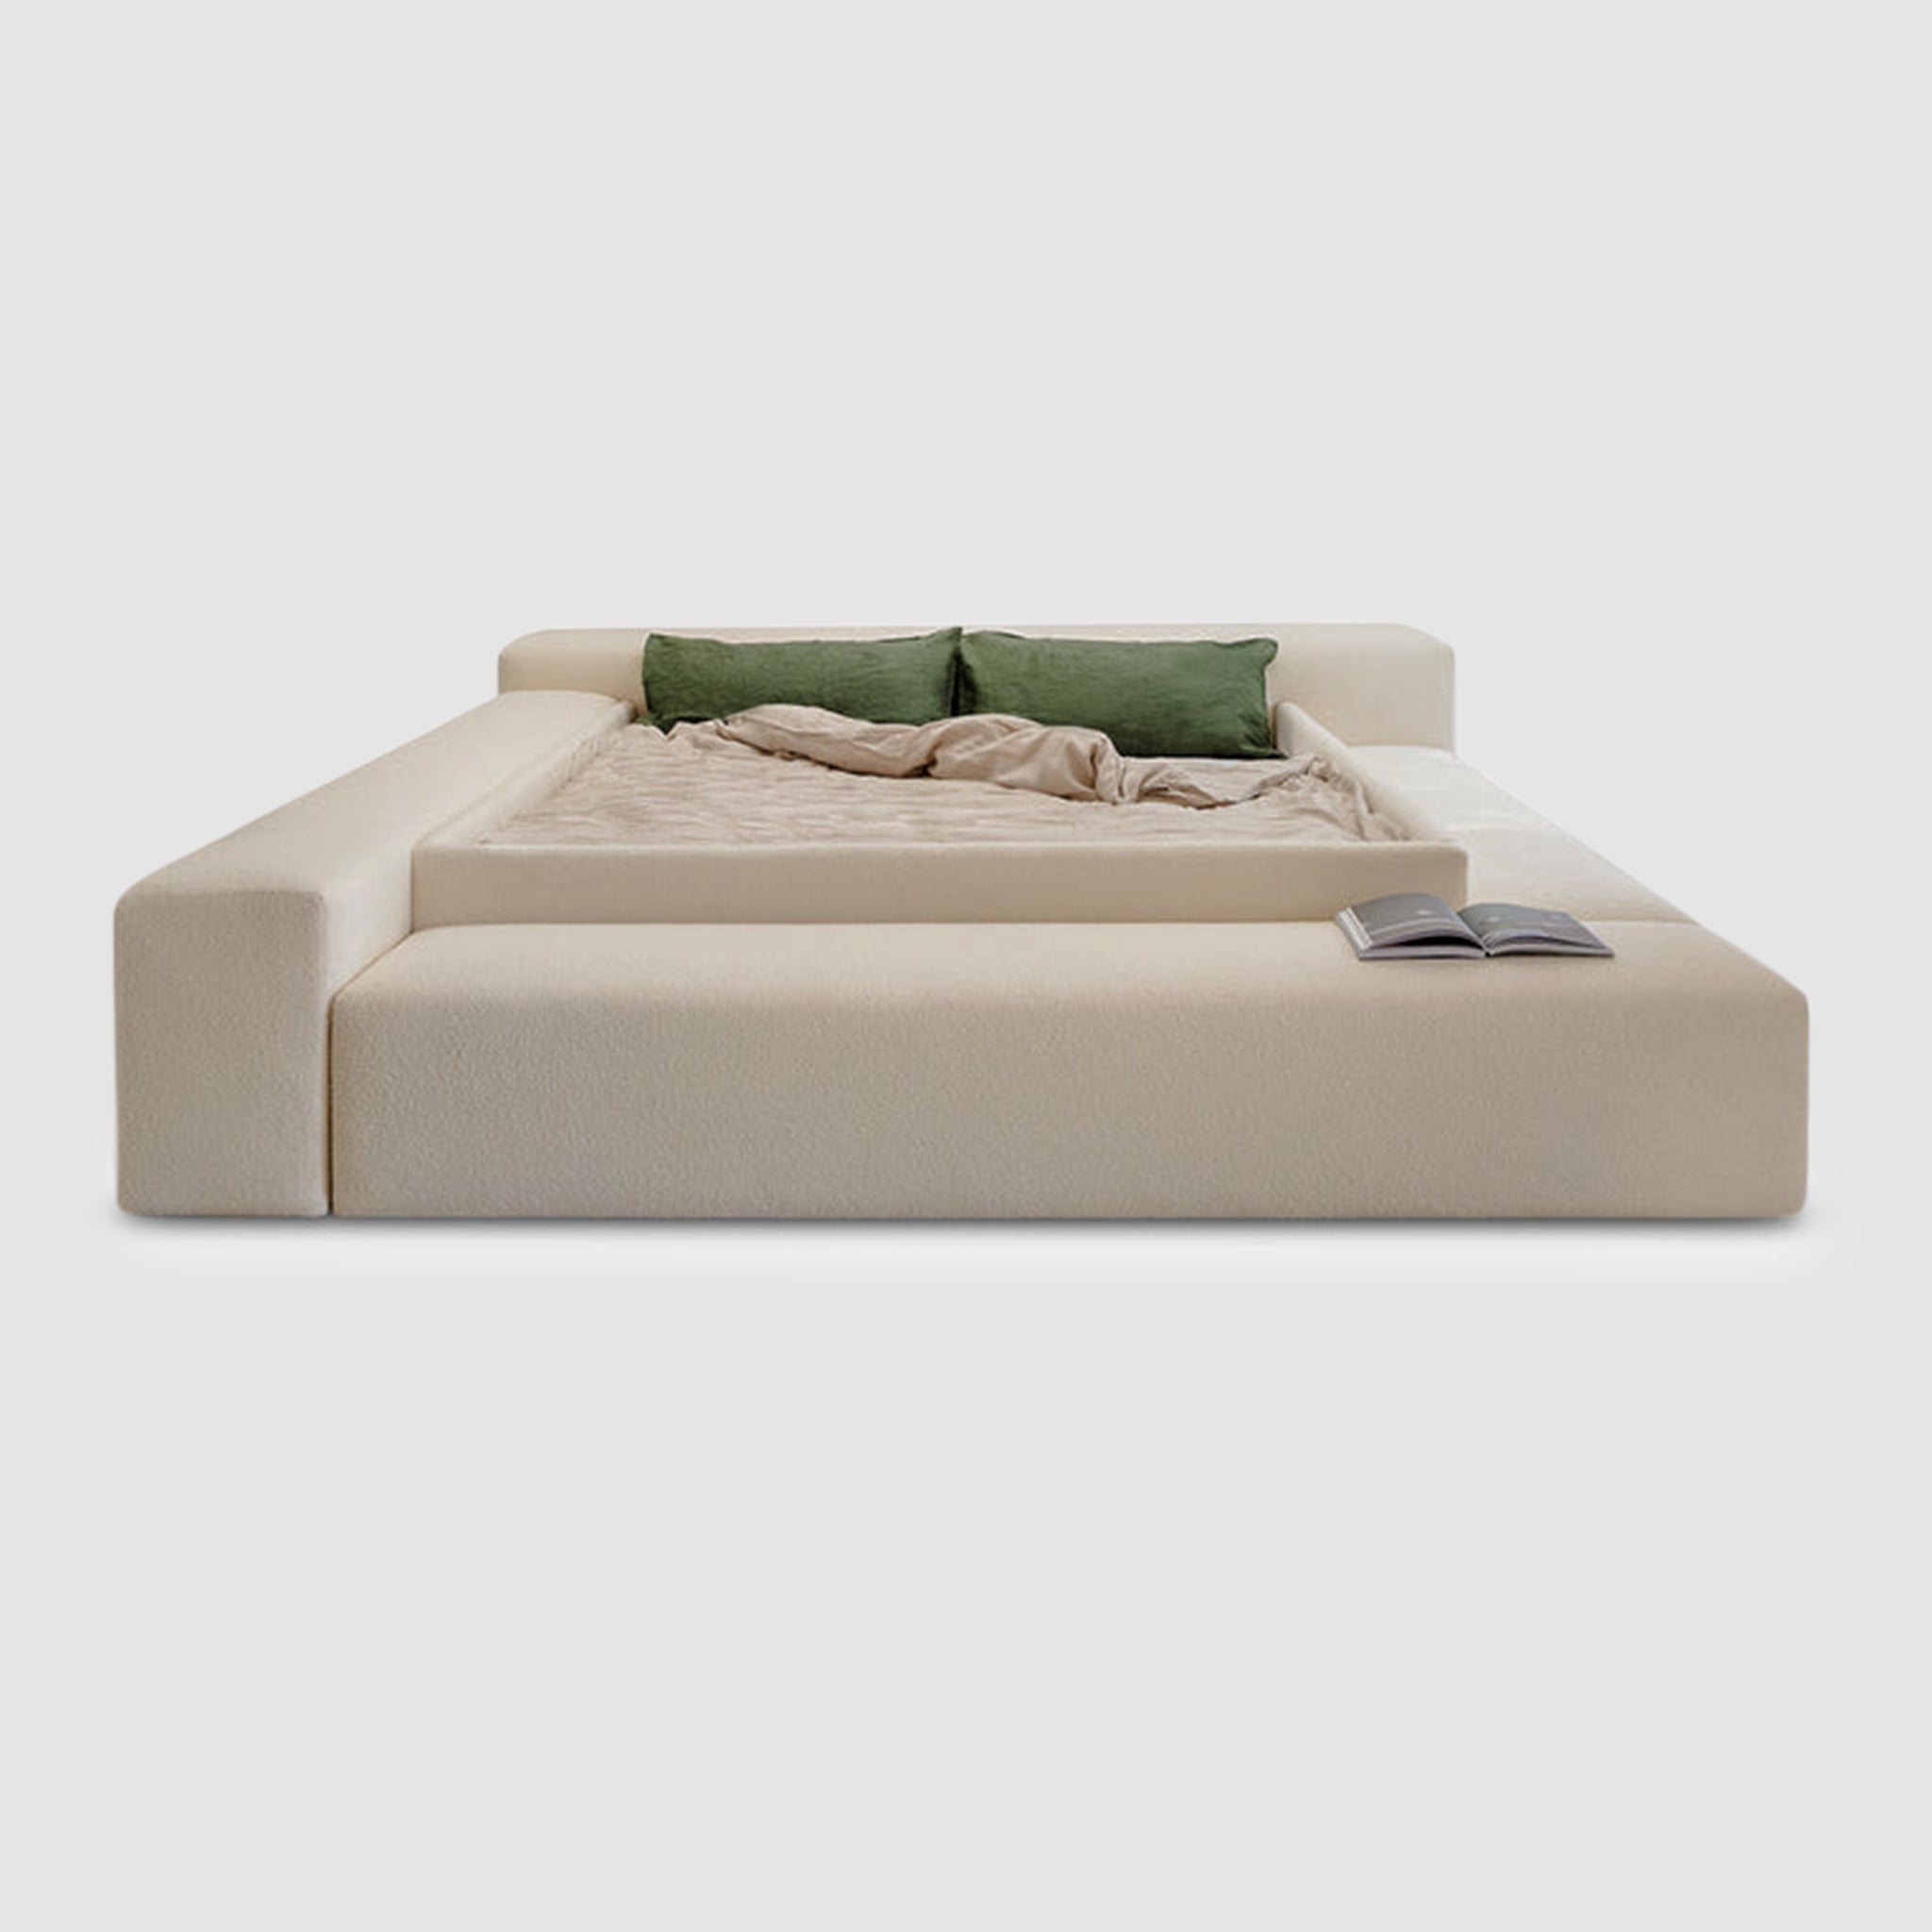 Plush, biscuit-tufted gray bed with integrated seating on two sides. The Heff Bed by Klettkic offers a space-saving solution for modern bedrooms, perfect for reading, relaxing, or changing shoes.